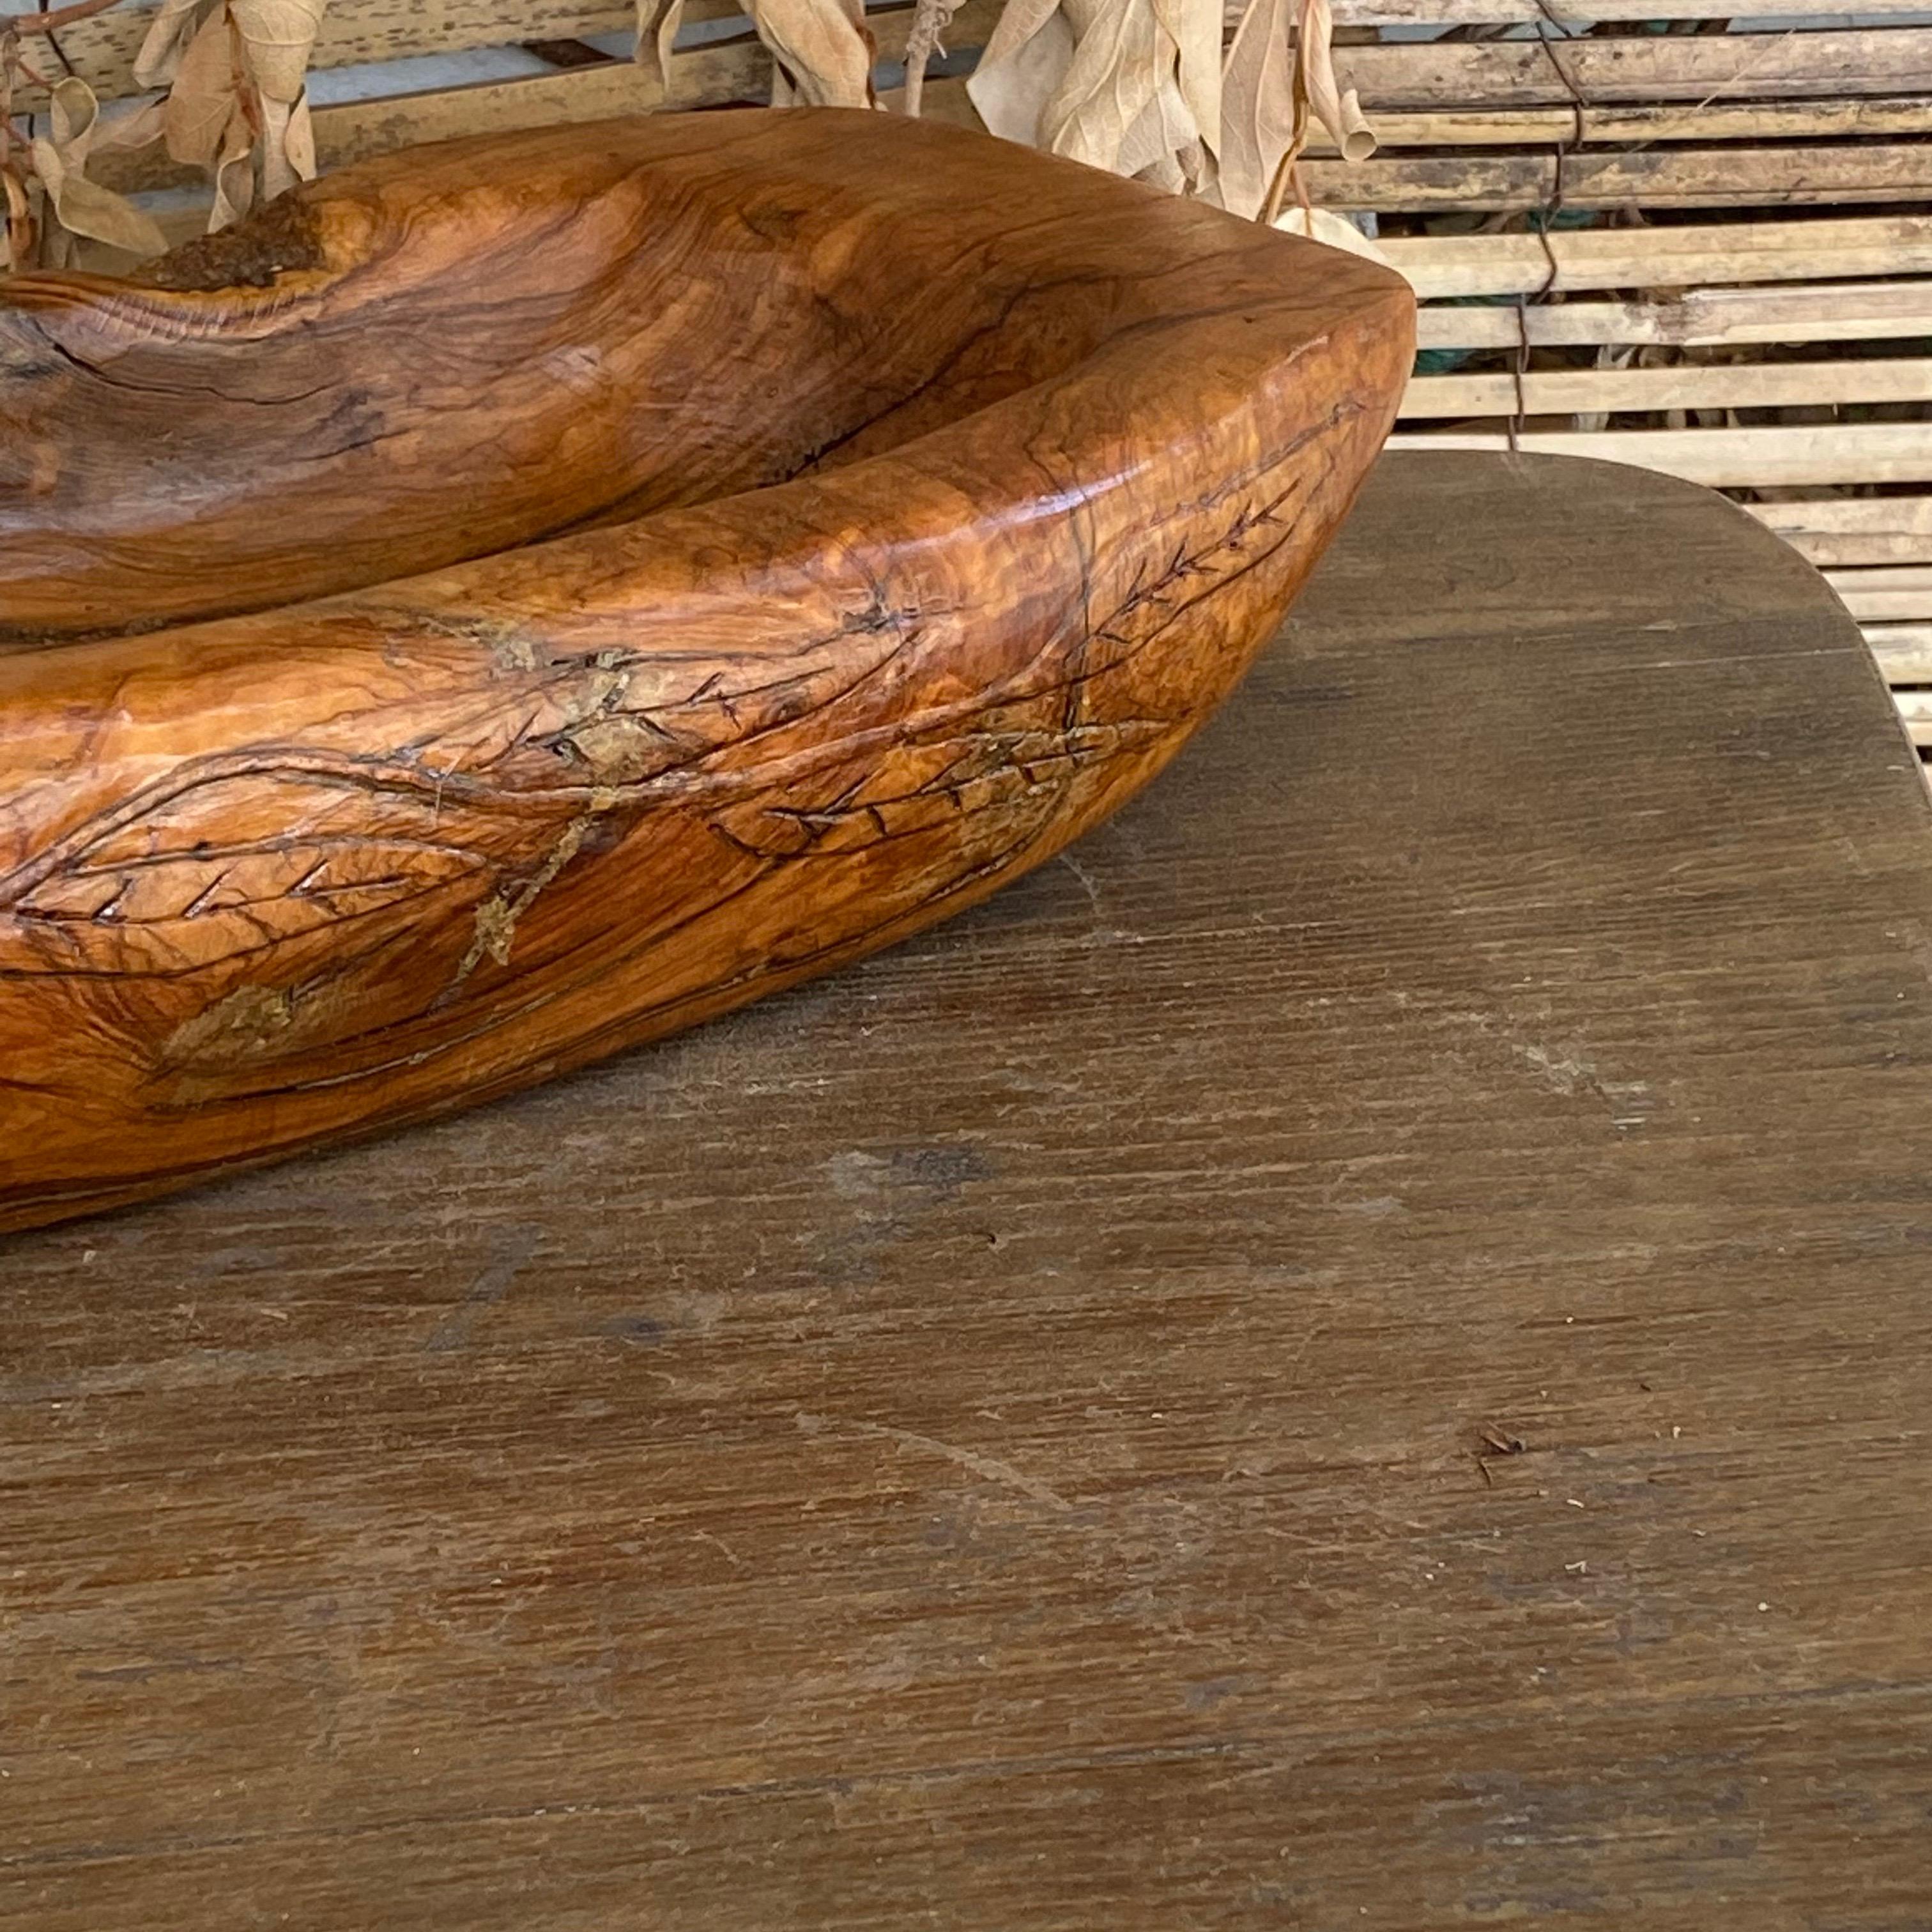 Vide Poche or Bowl in Wood, Old Patina, France 1950 For Sale 2